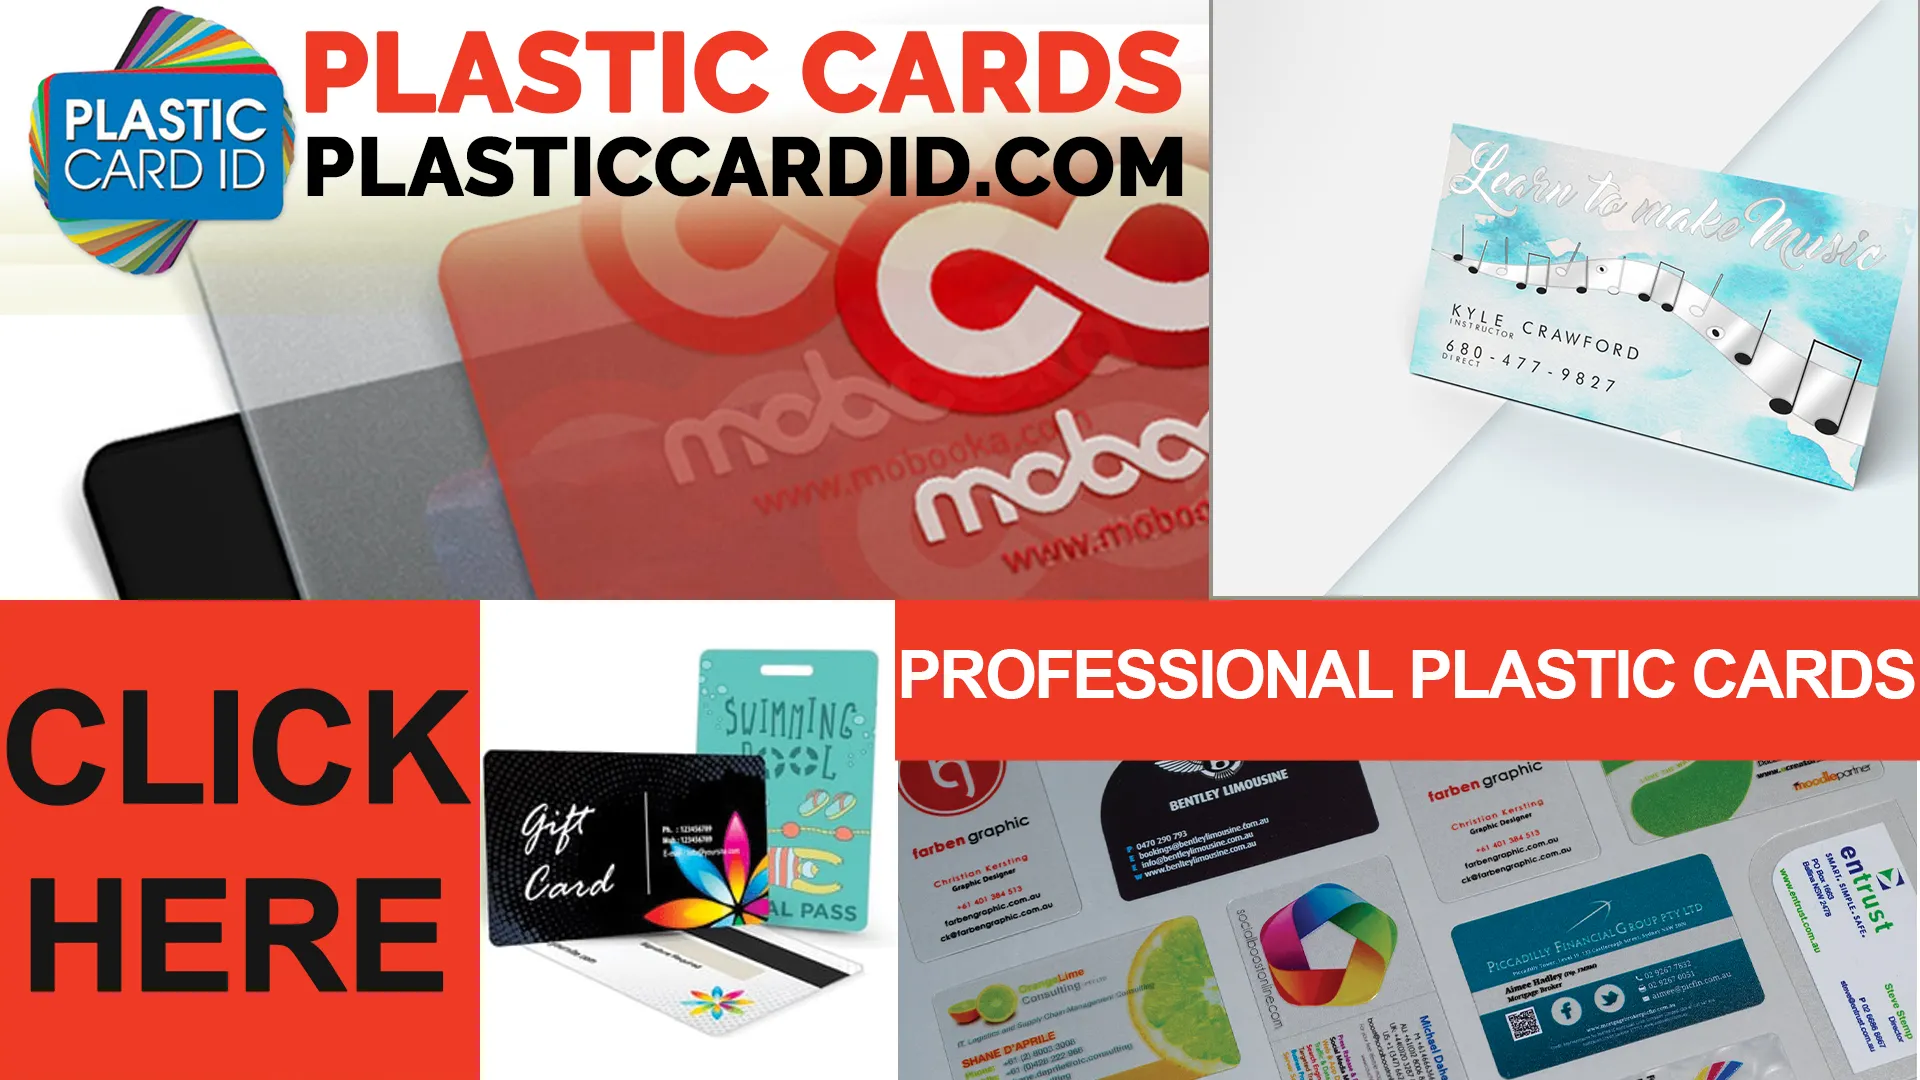  Leading the Charge in Plastic Card Innovation 